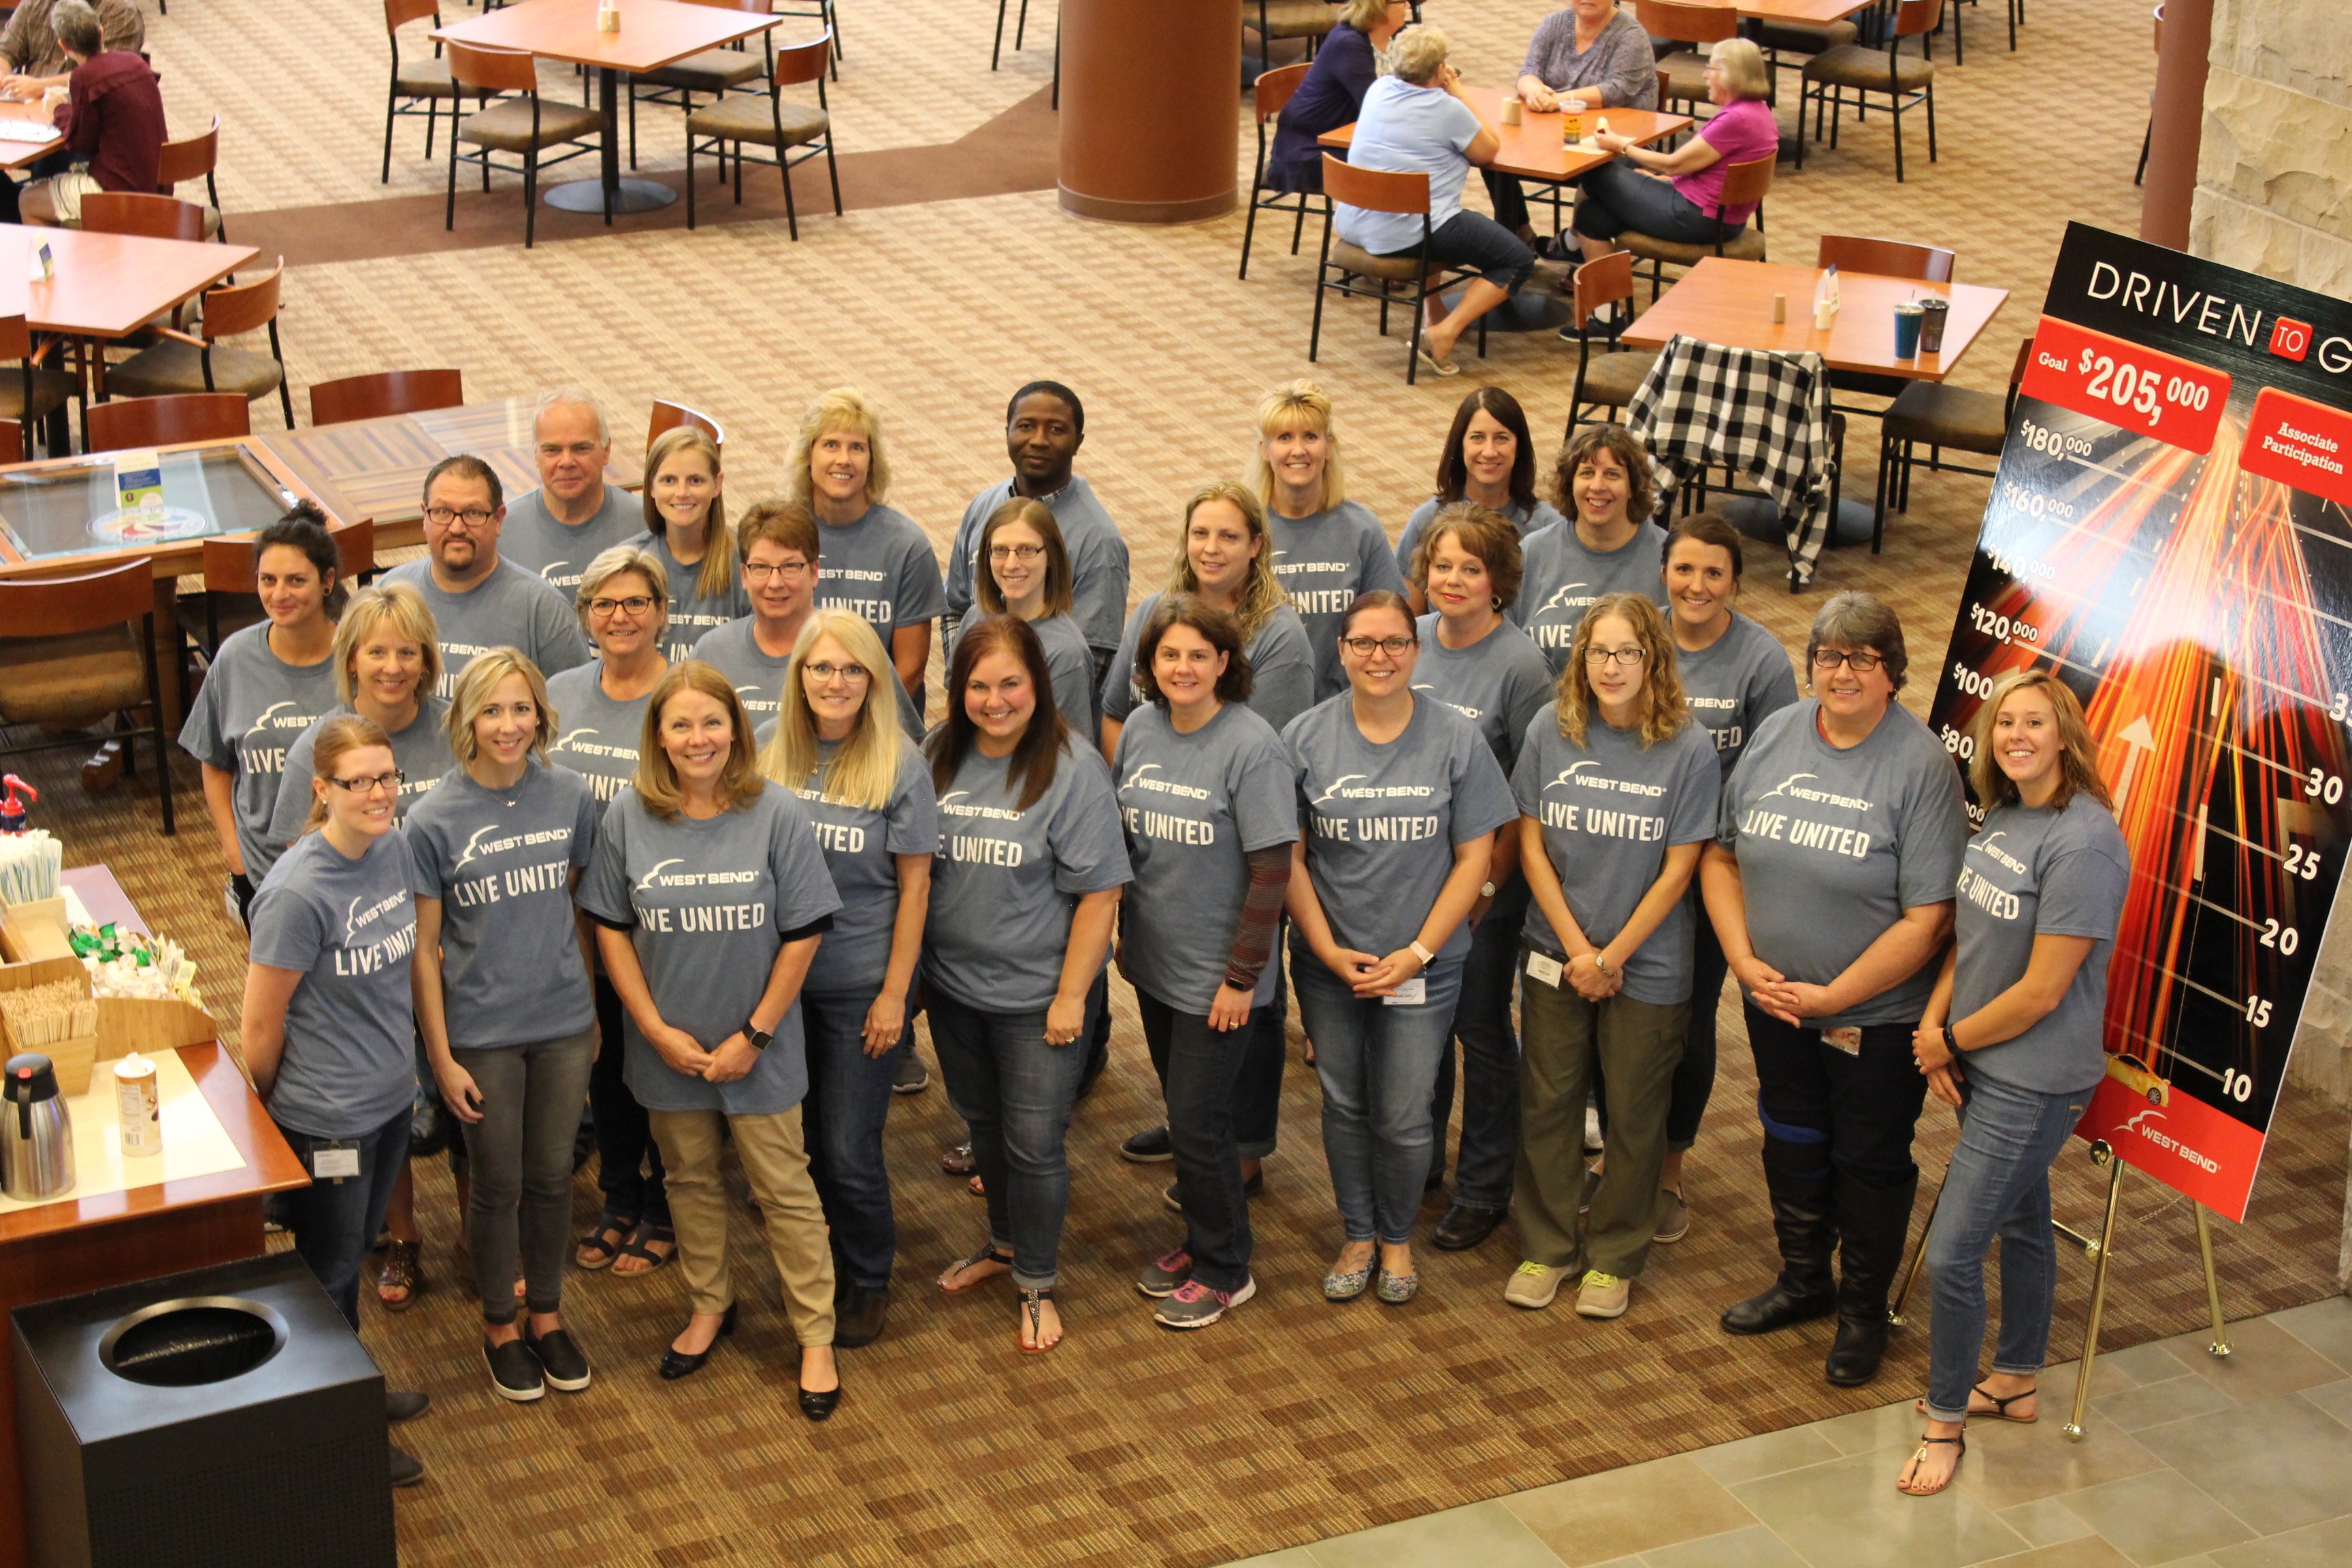 Group photo of West Bend associates wearing Live United T-shirts.